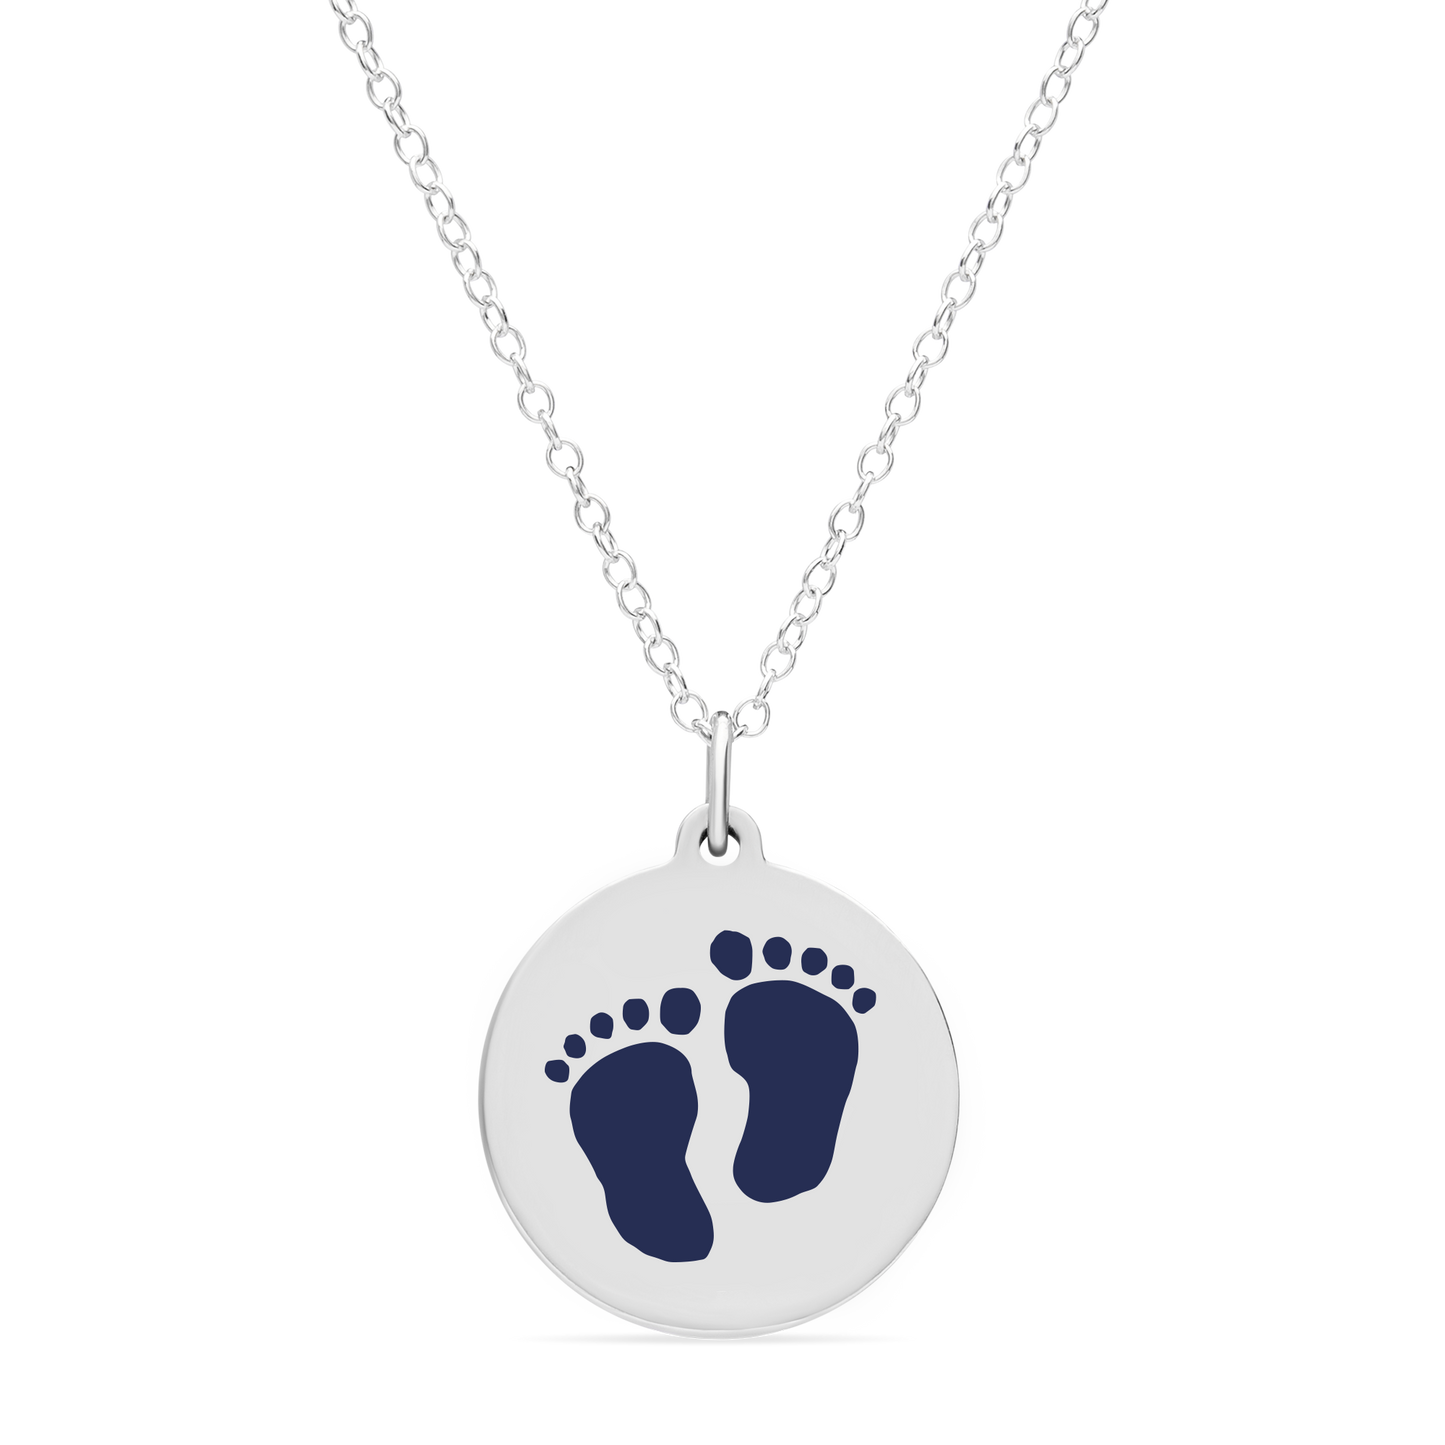 ORIGINAL BABYFEET CHARM in sterling silver with rhodium plate